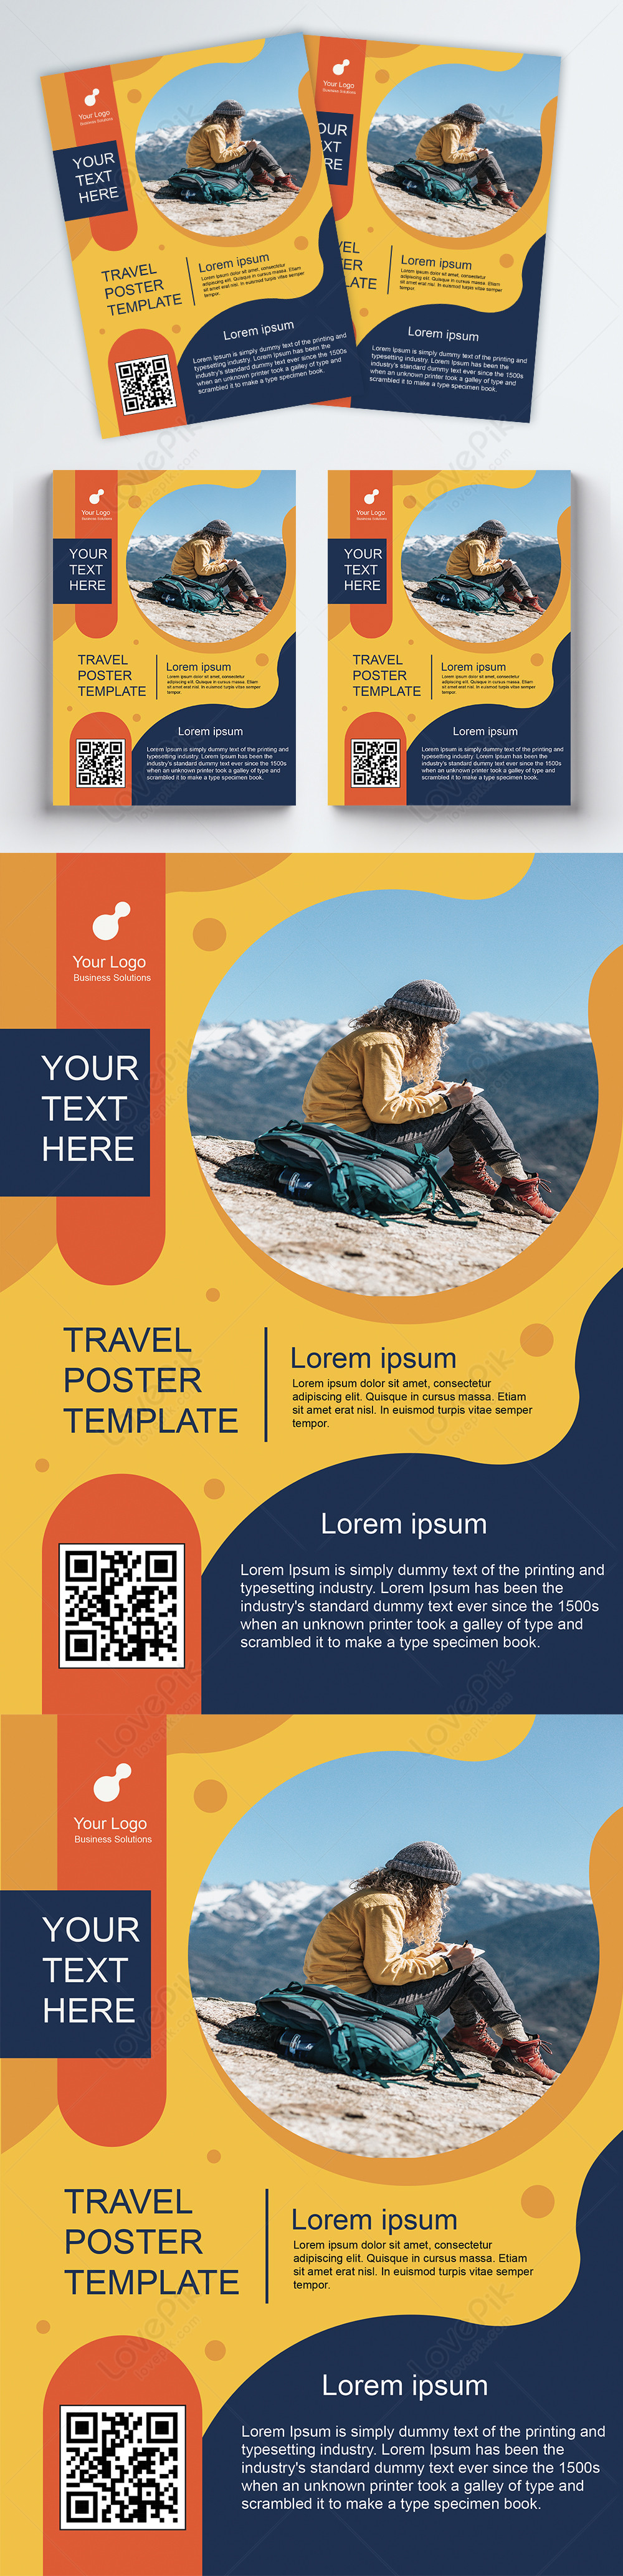 travel-flyers-template-image-picture-free-download-450081082-lovepik